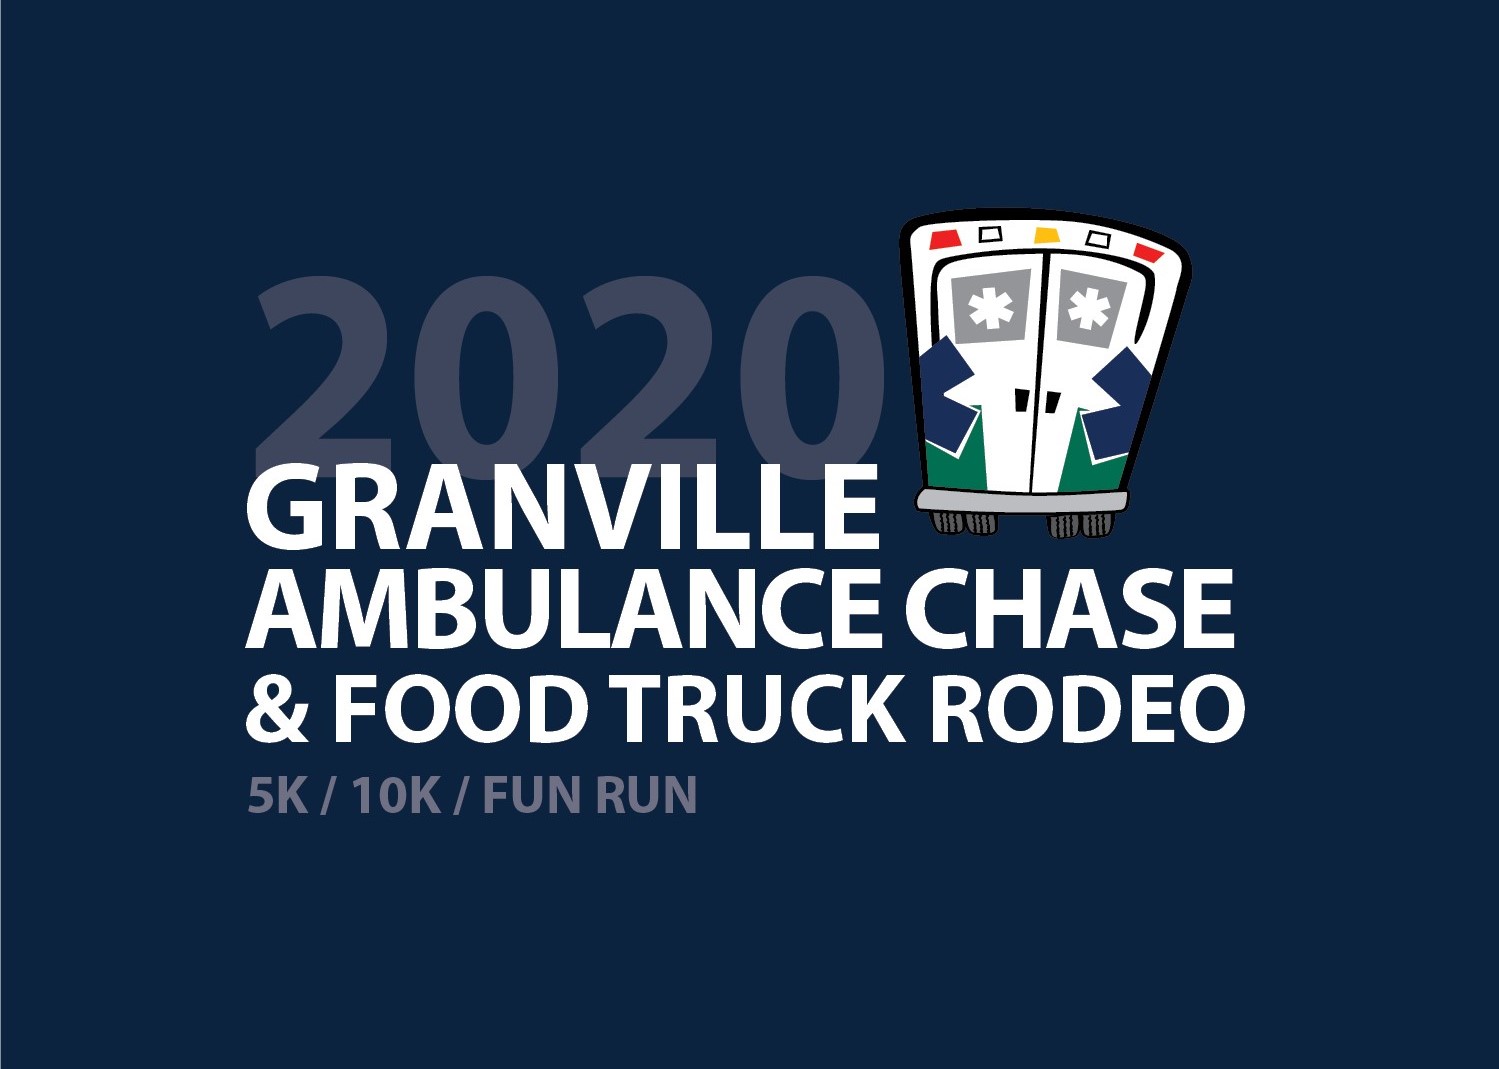 The Granville Health System Foundation Announces Morning Start for Ambulance Chase and Food Truck Rodeo